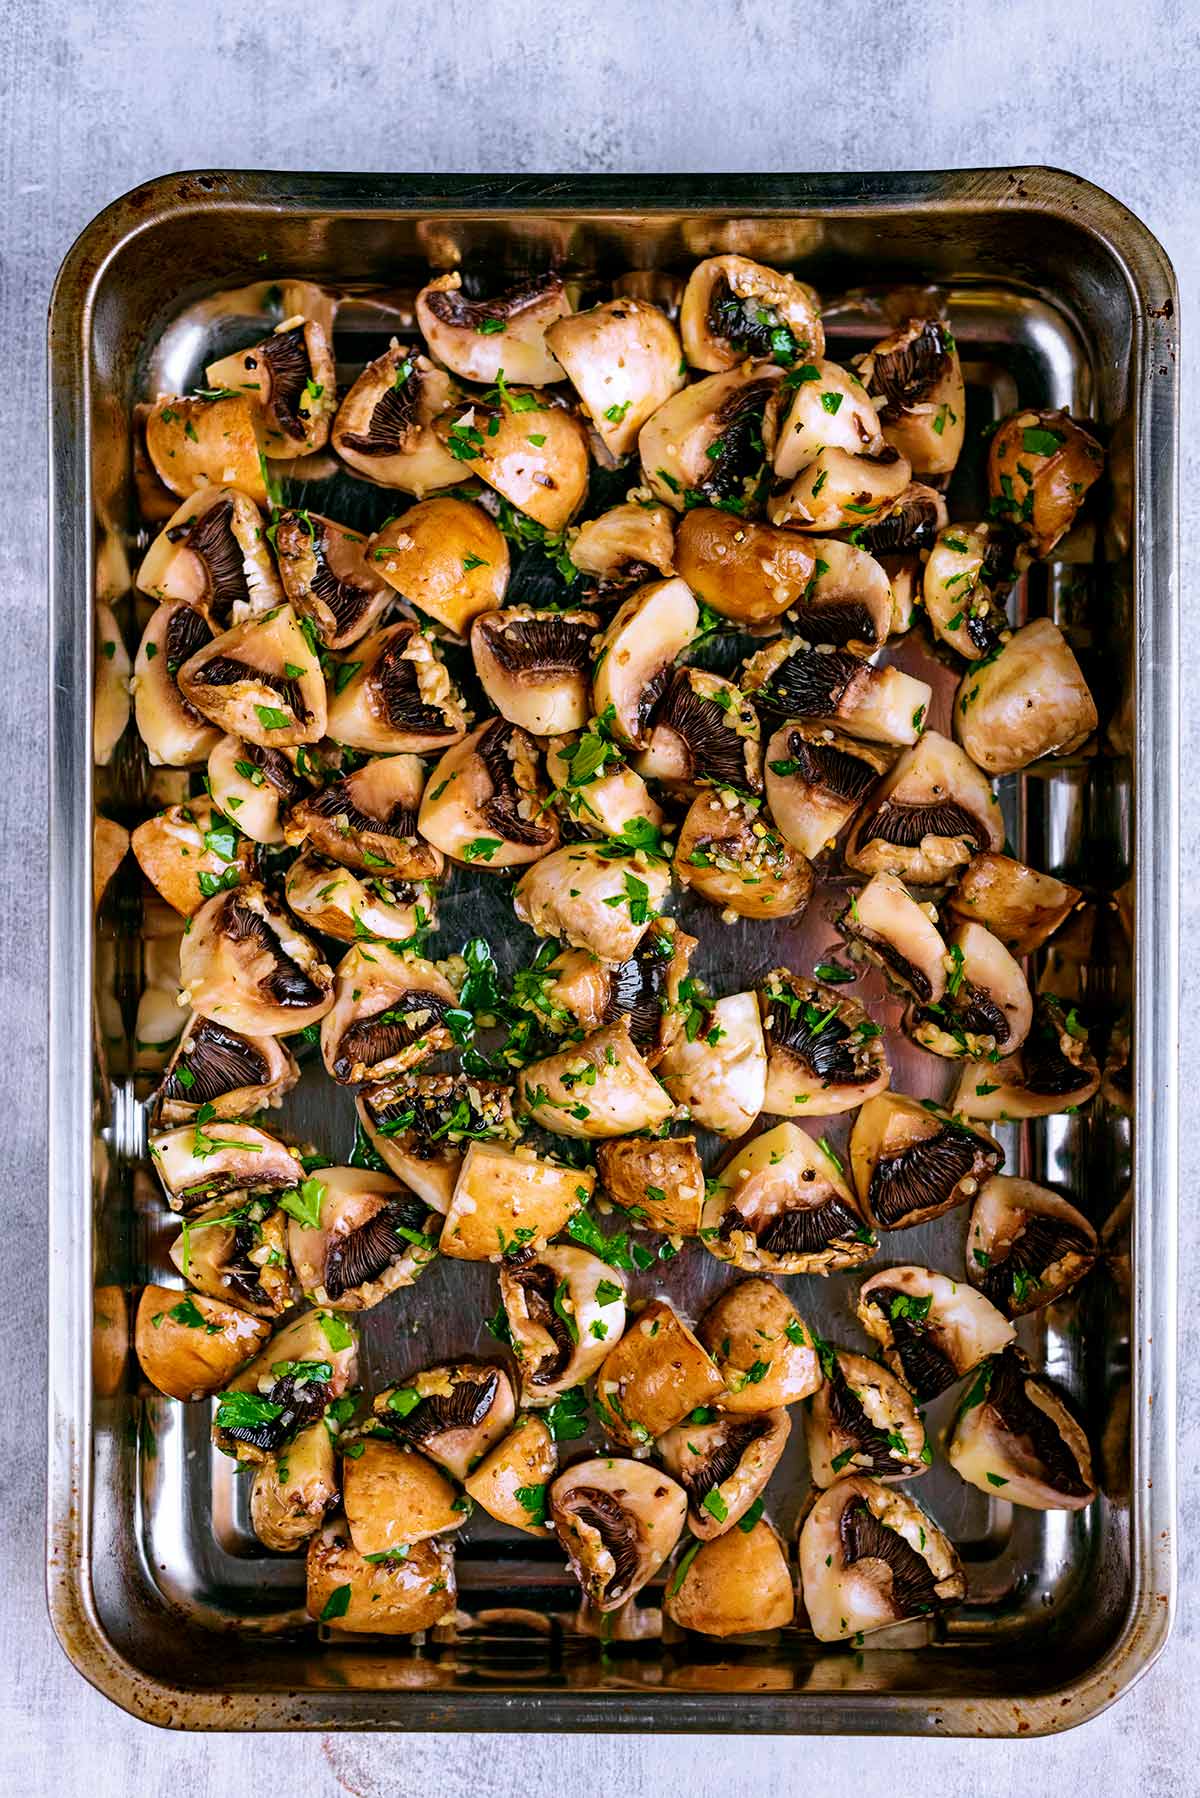 A baking tray covered in chopped mushrooms and herbs.